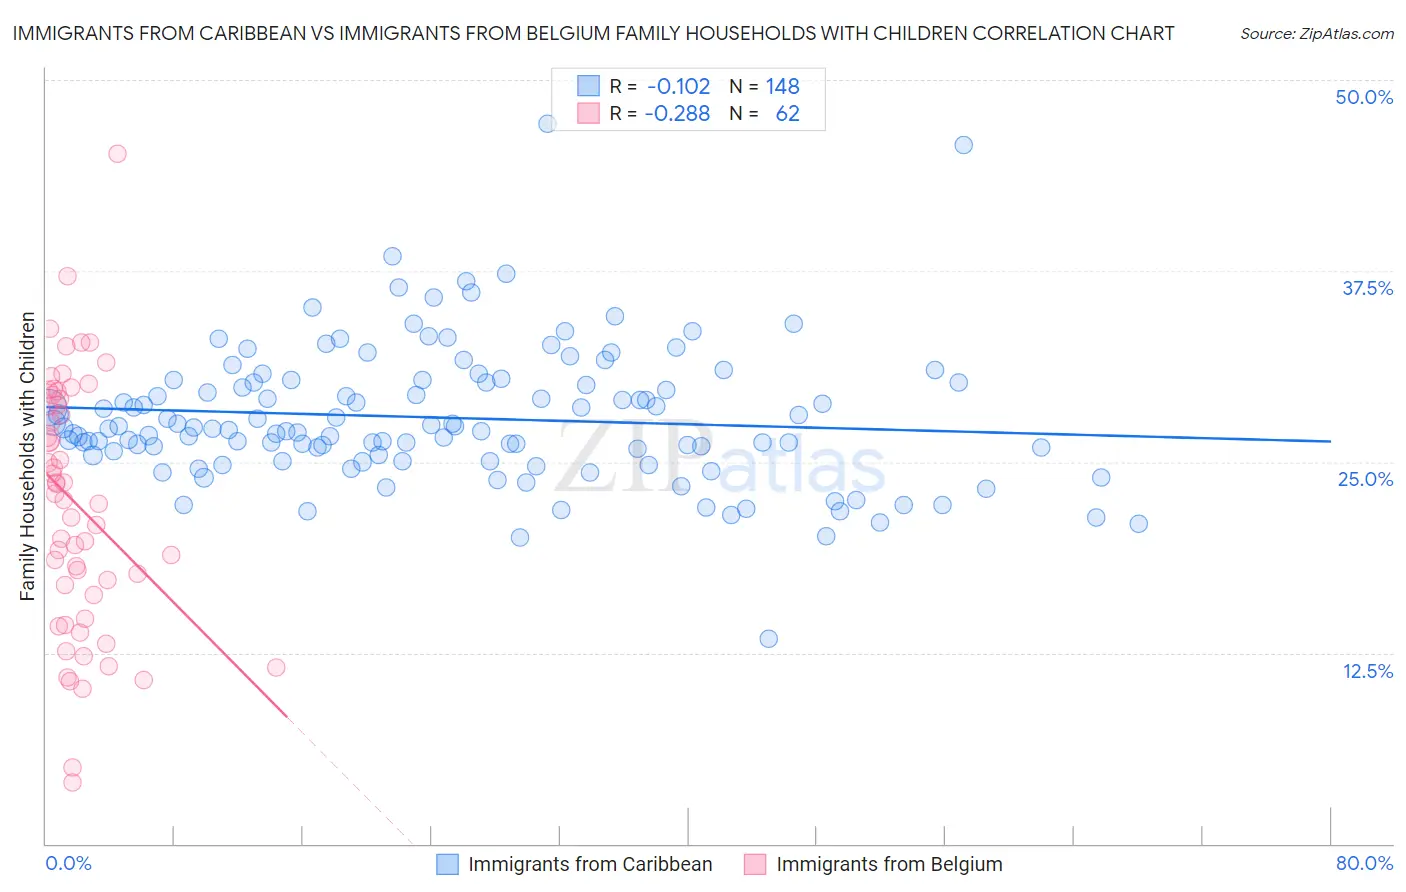 Immigrants from Caribbean vs Immigrants from Belgium Family Households with Children